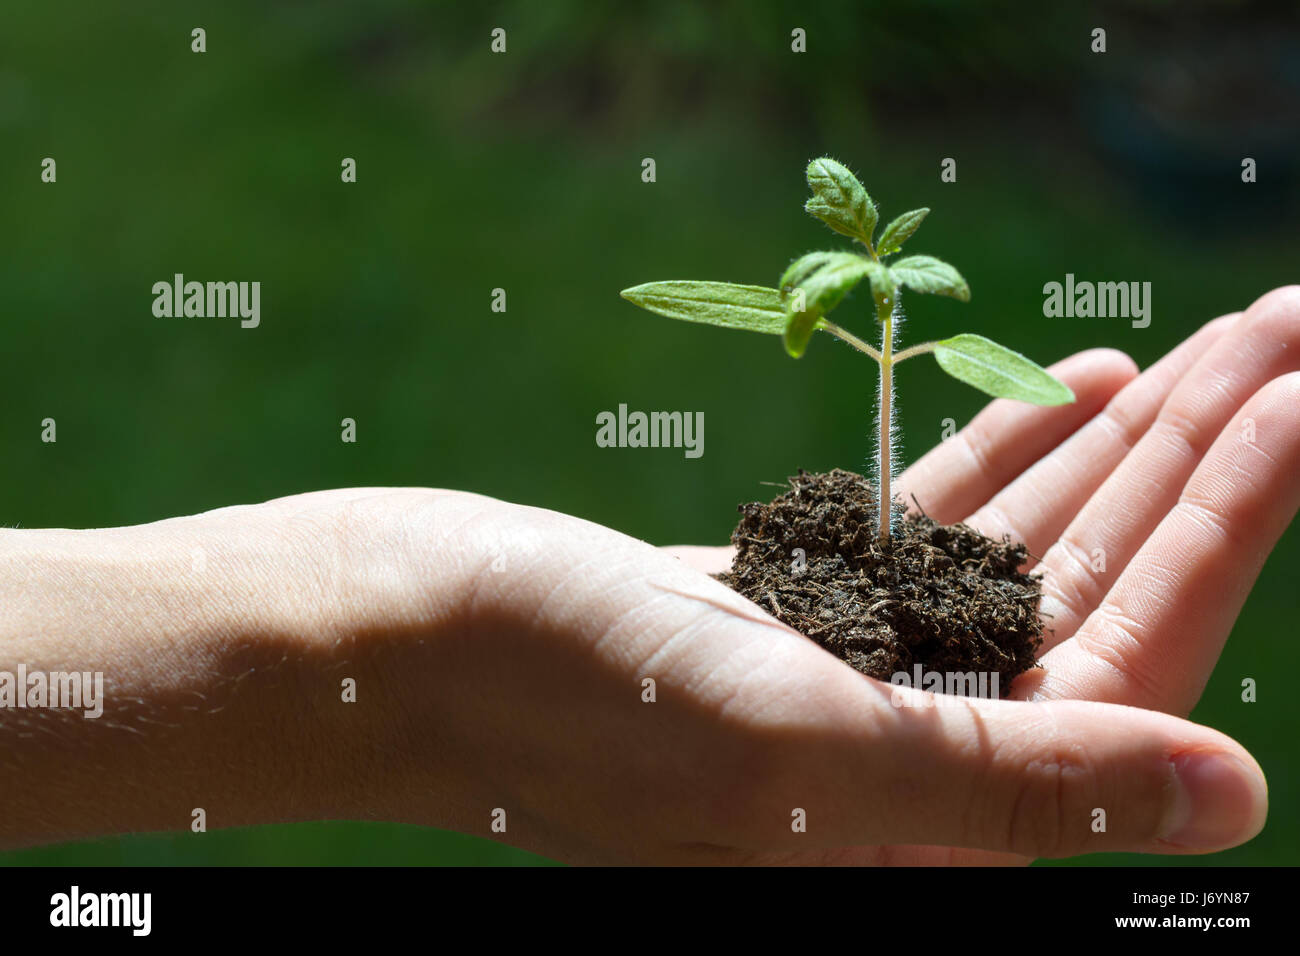 Hand holding a growing young plant, green background, new life, gardening, environment and ecology concept Stock Photo